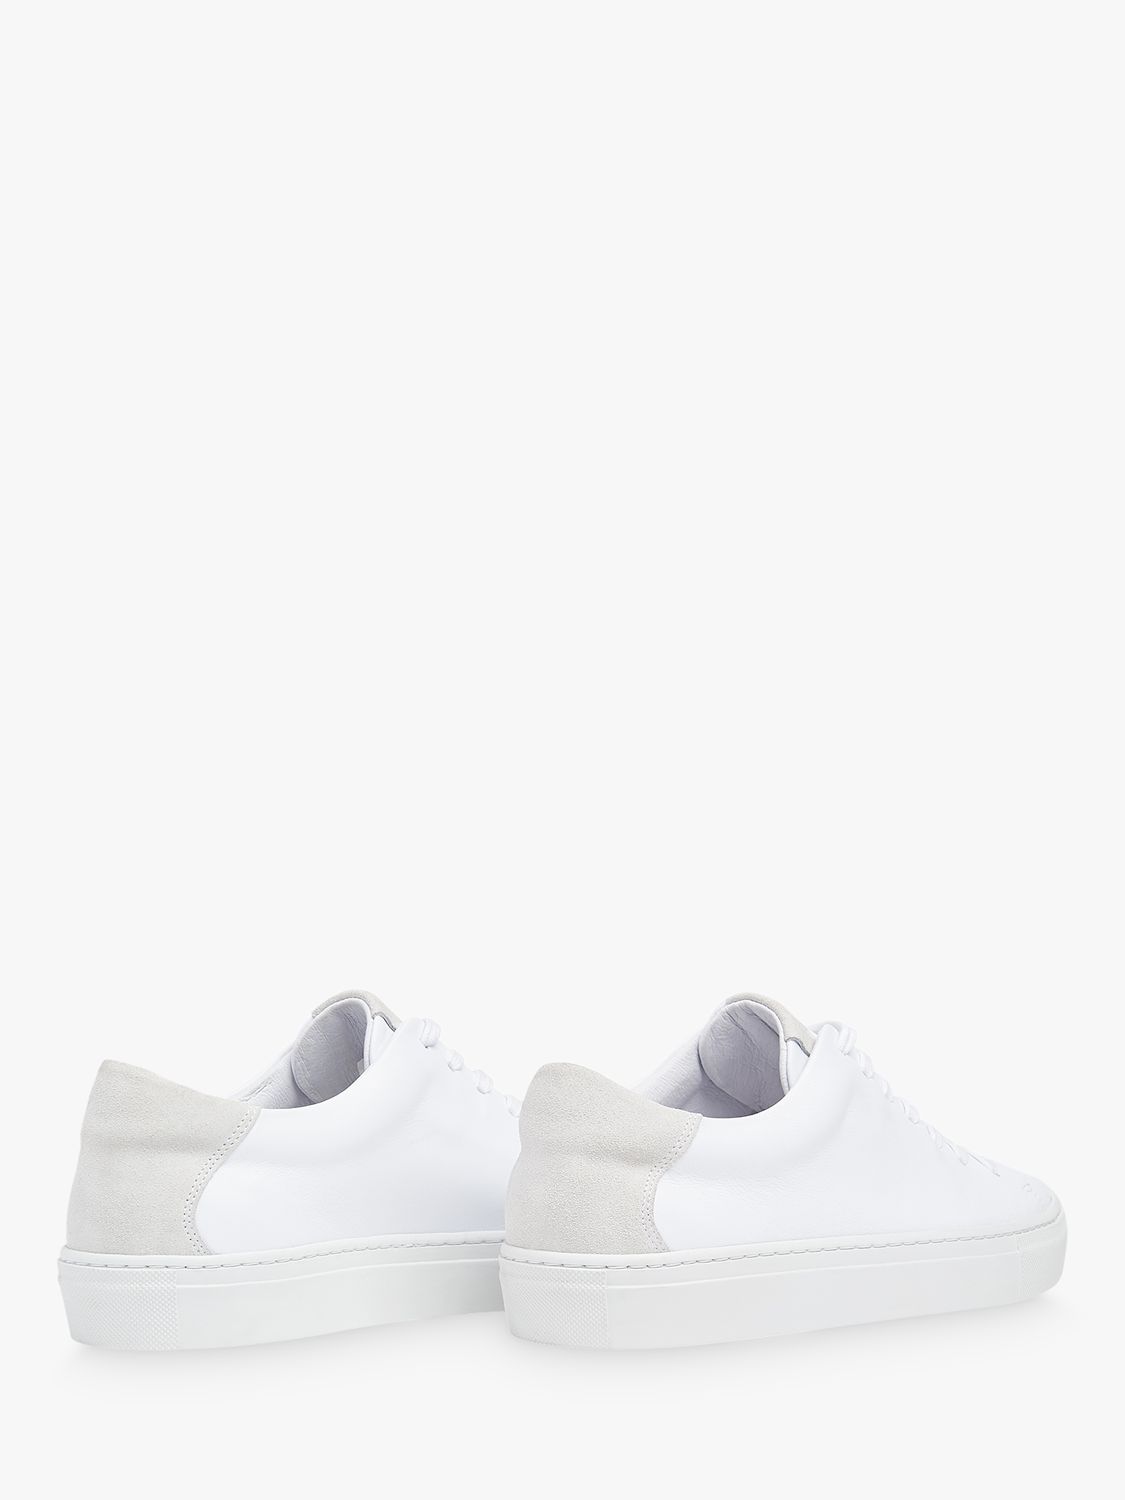 Buy Whistles Raife Leather Minimal Trainers, White Online at johnlewis.com